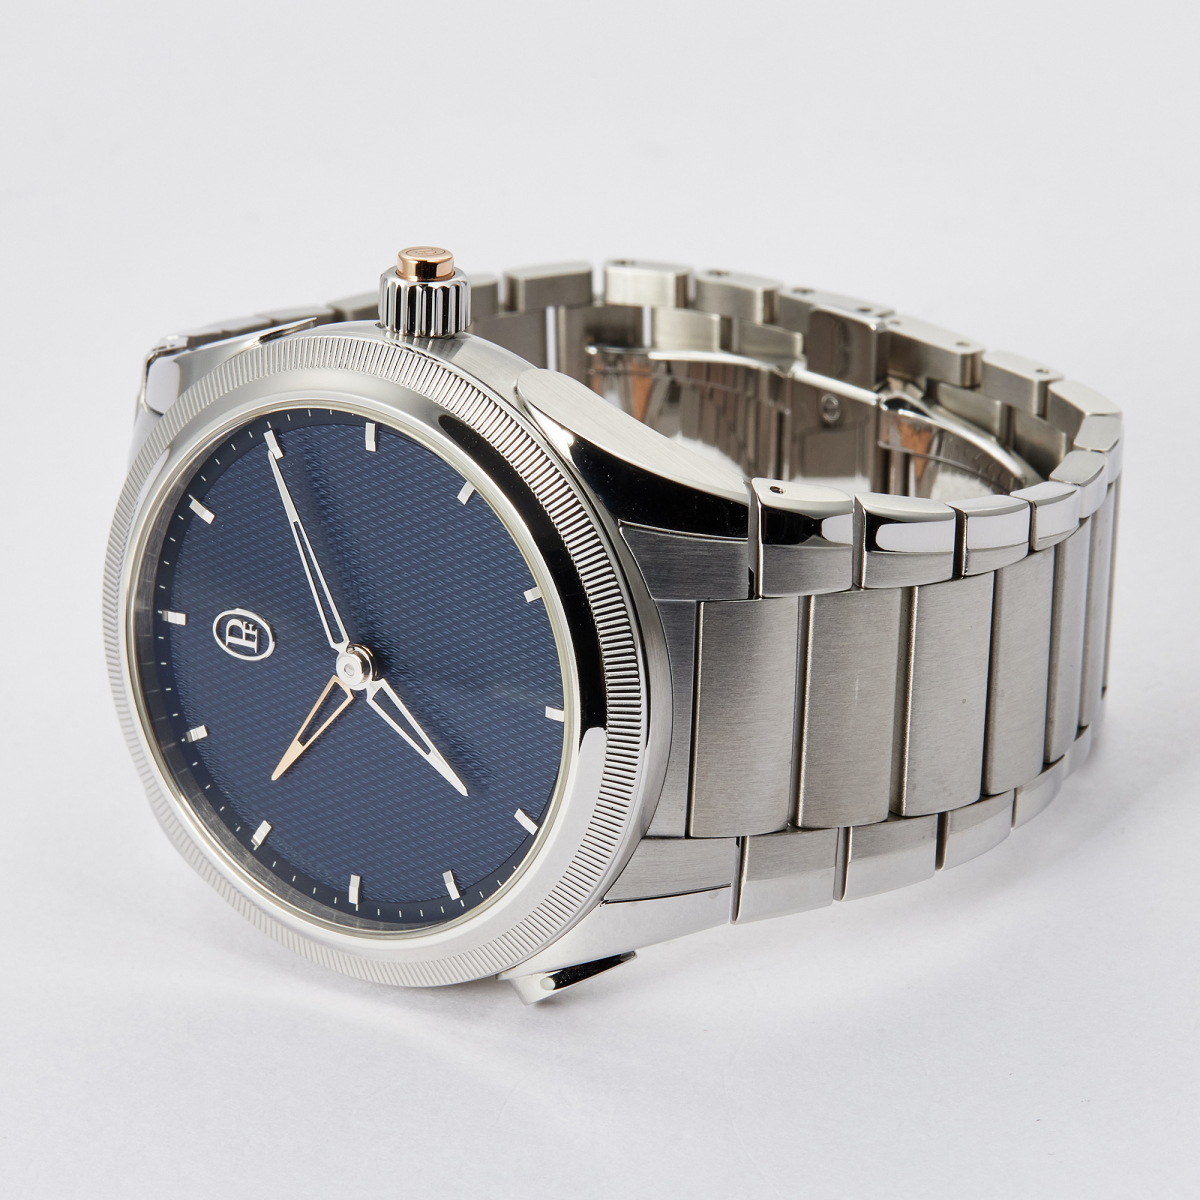 Tonda PF GMT Rattrapante Stainless Steel Platinum Blue Dial